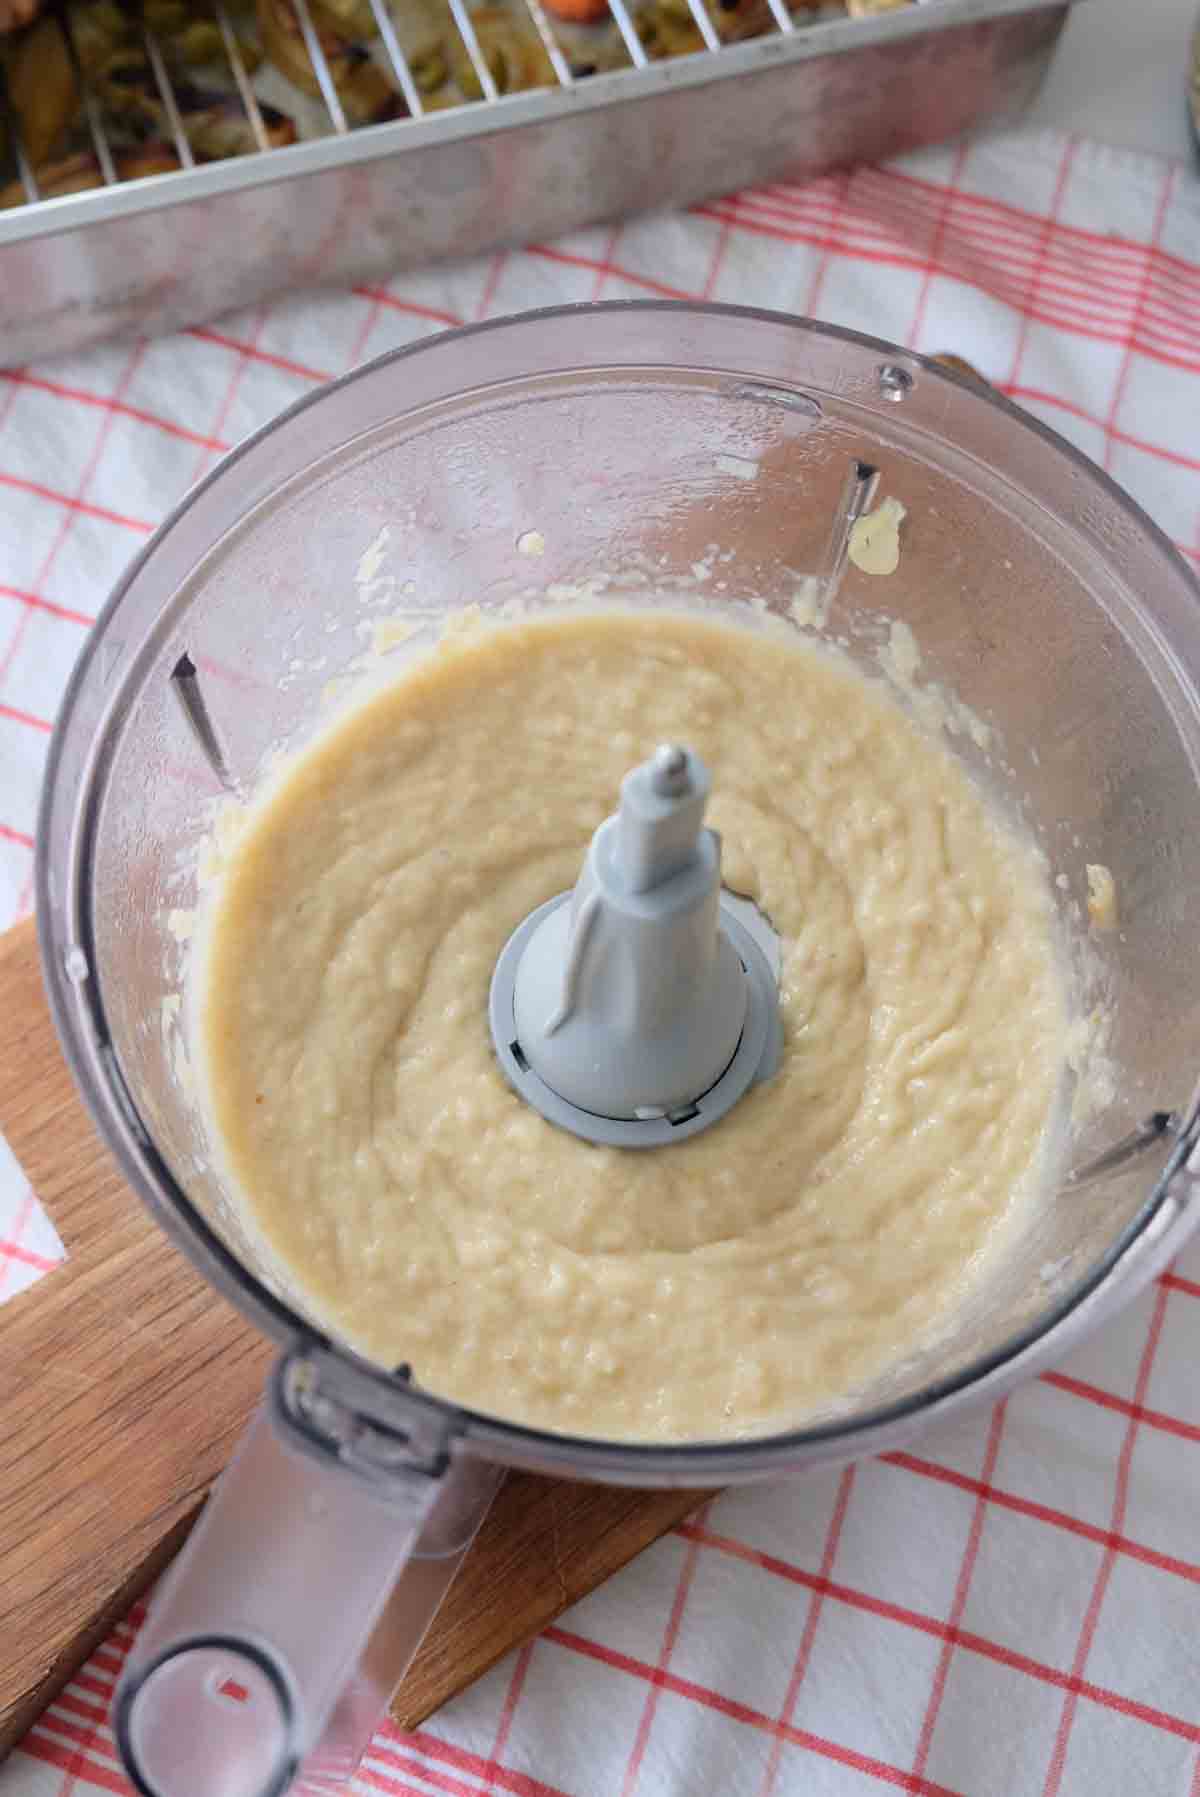 Smoothly blended sauce in a food processor bowl.